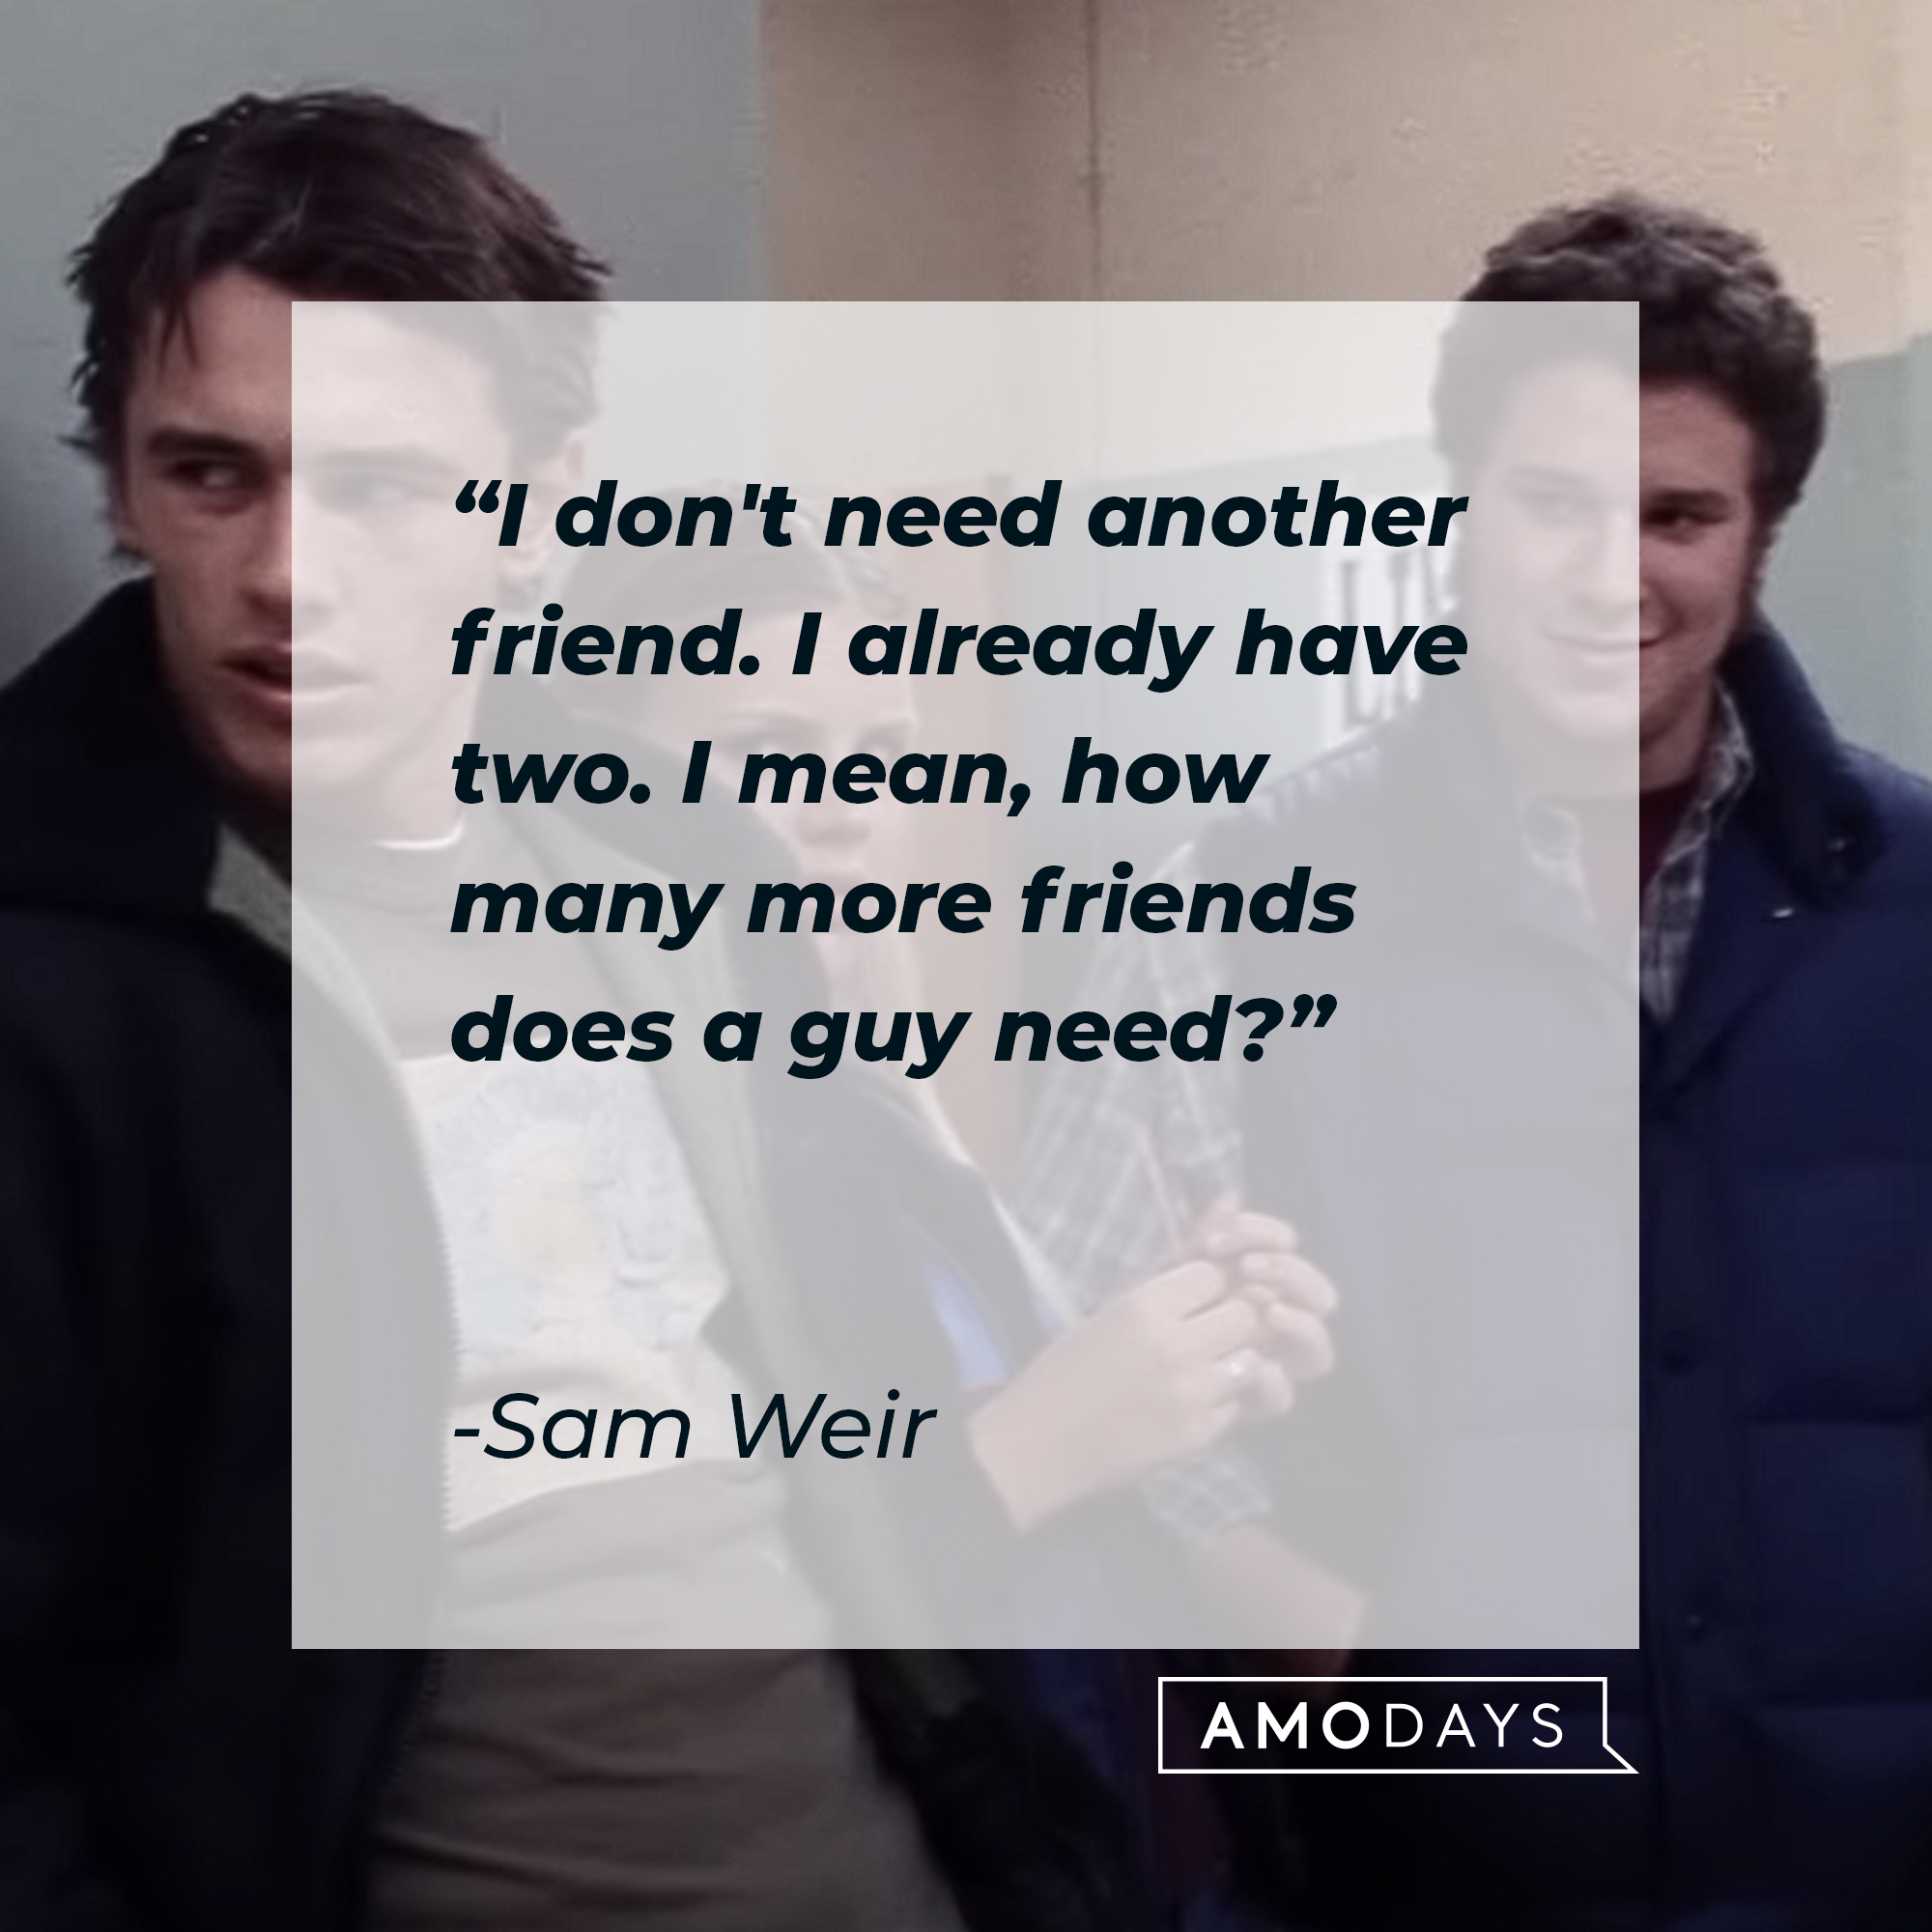 Sam Weir's quote: "I don't need another friend. I already have two. I mean, how many more friends does a guy need?" | Source: Youtube.com/paramountmovies